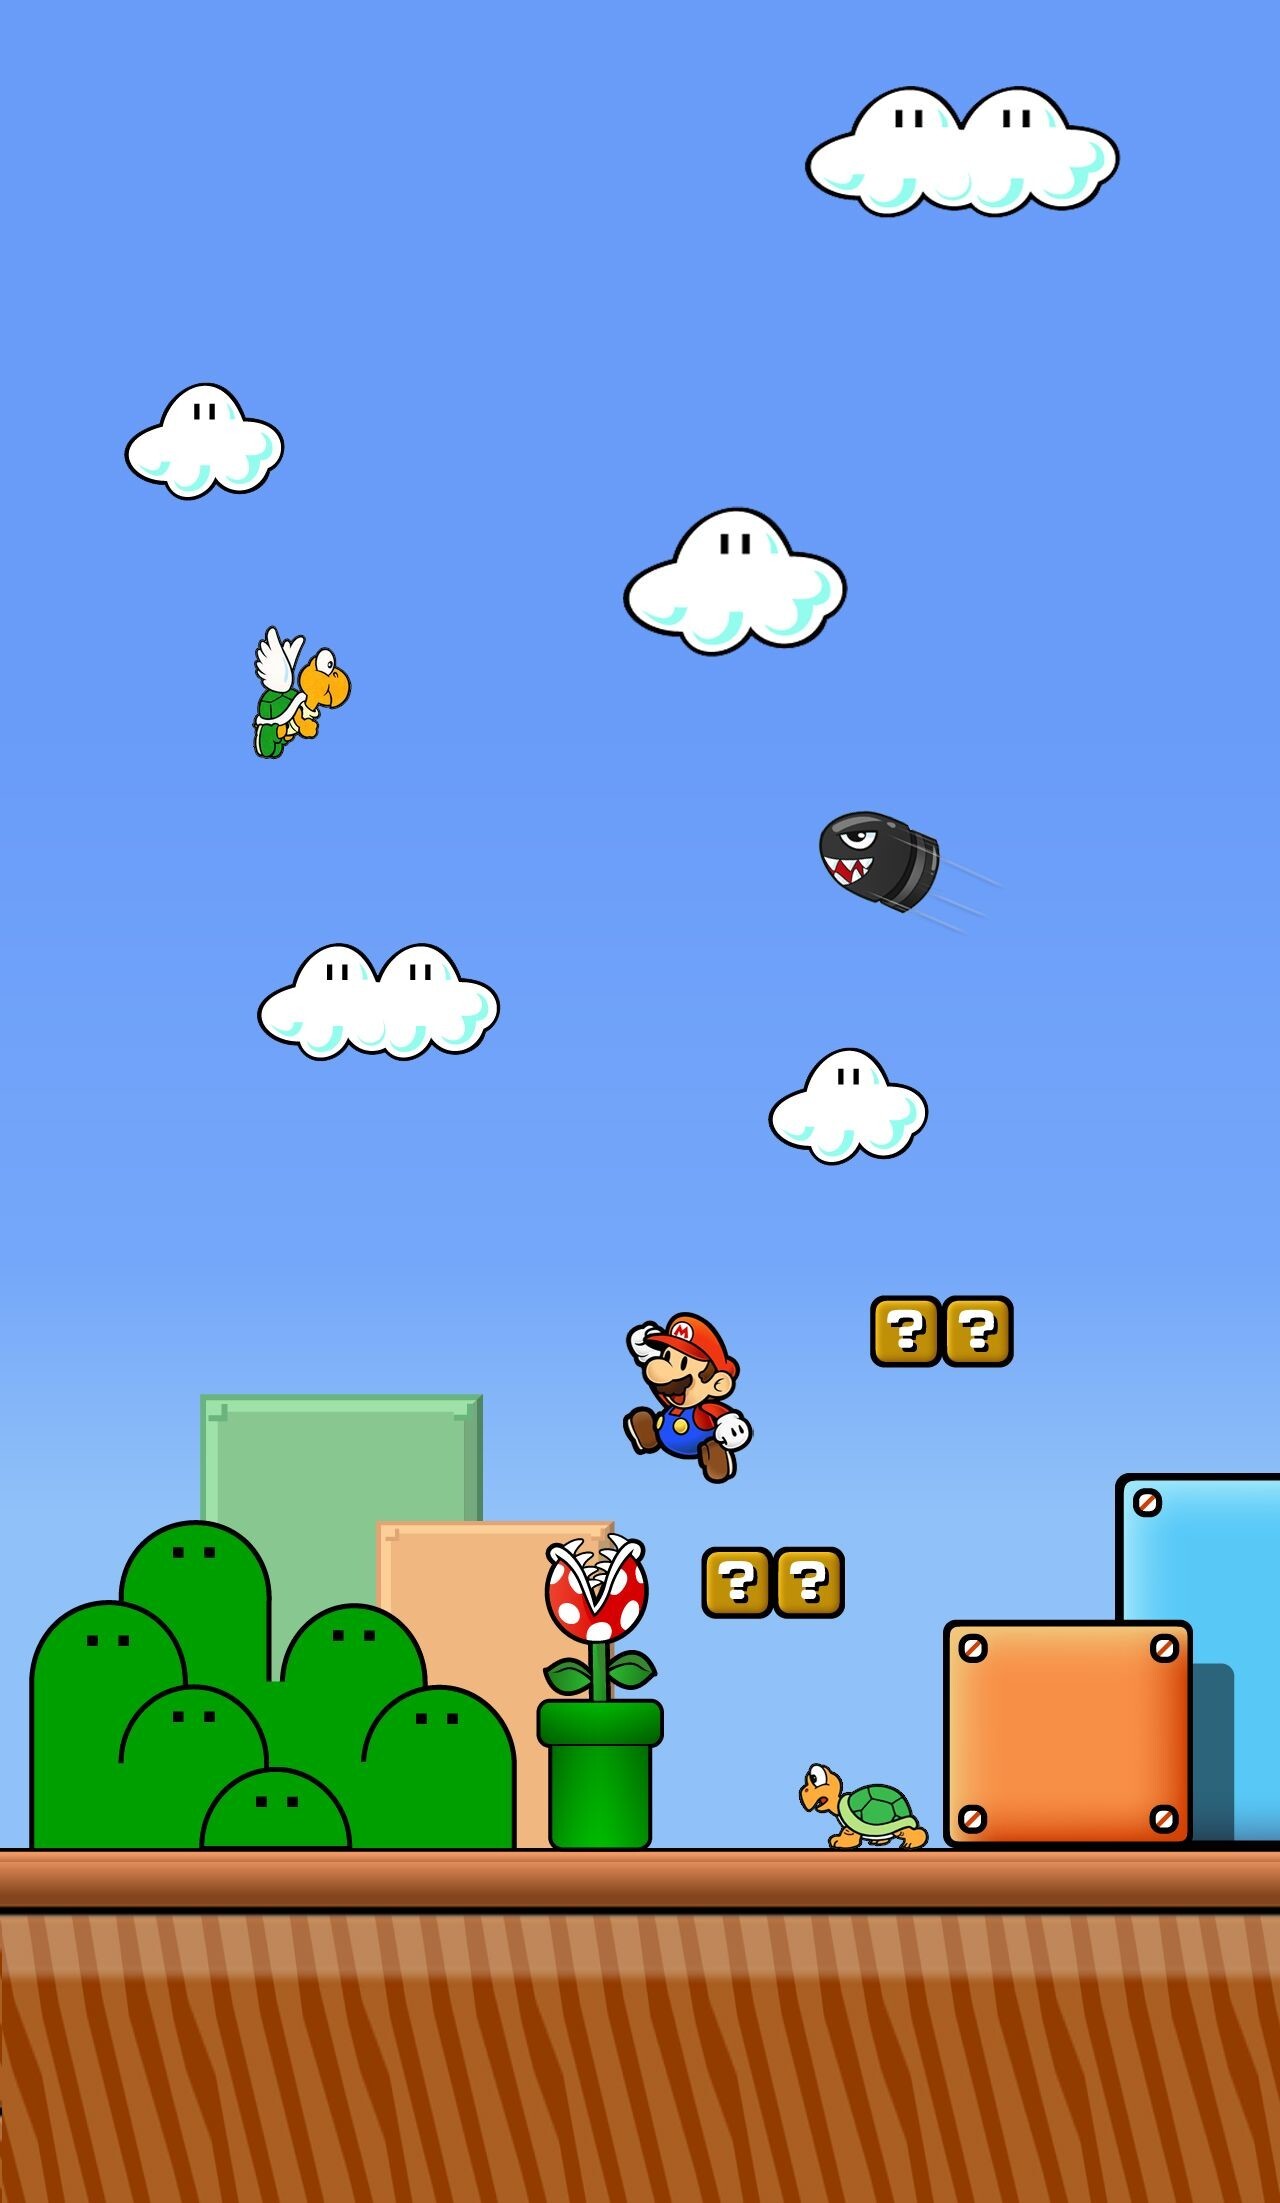 Geek: 8-Bit games, Mario, A platform game developed and published by Nintendo. 1280x2210 HD Background.